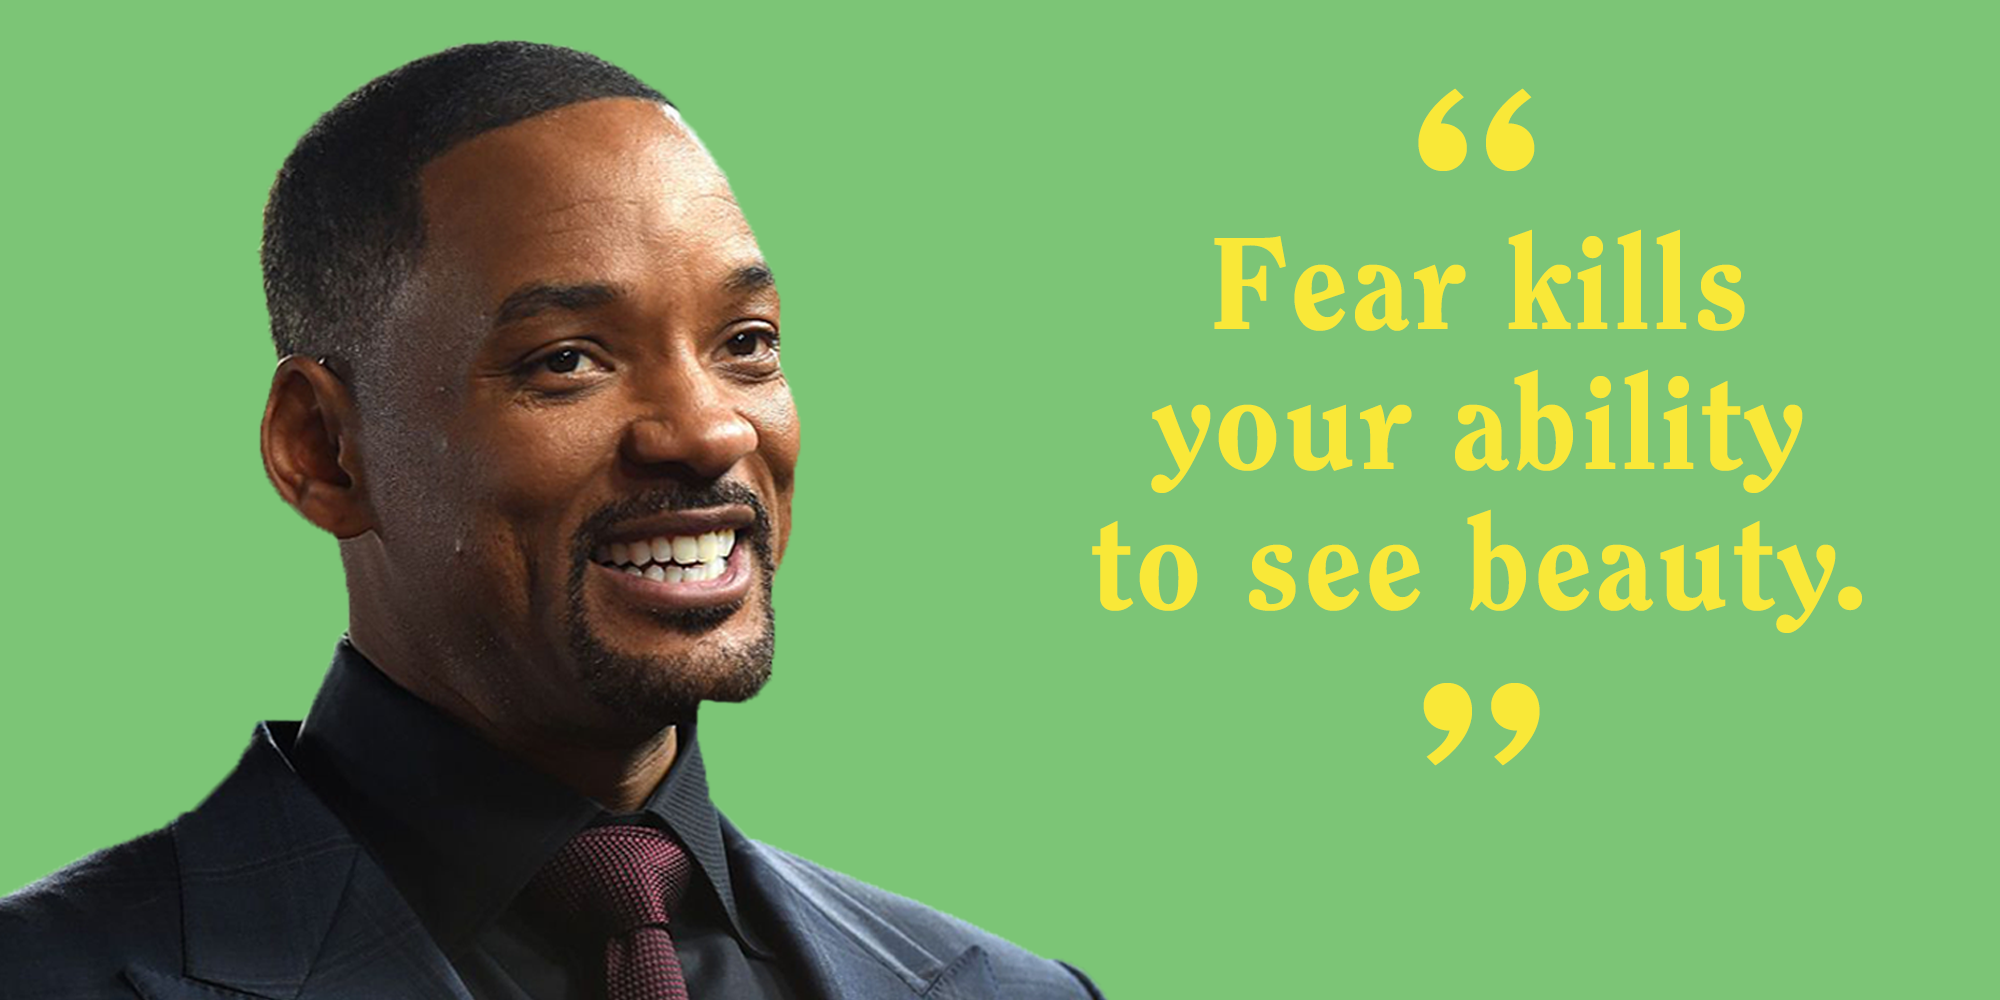 will smith quotes on life